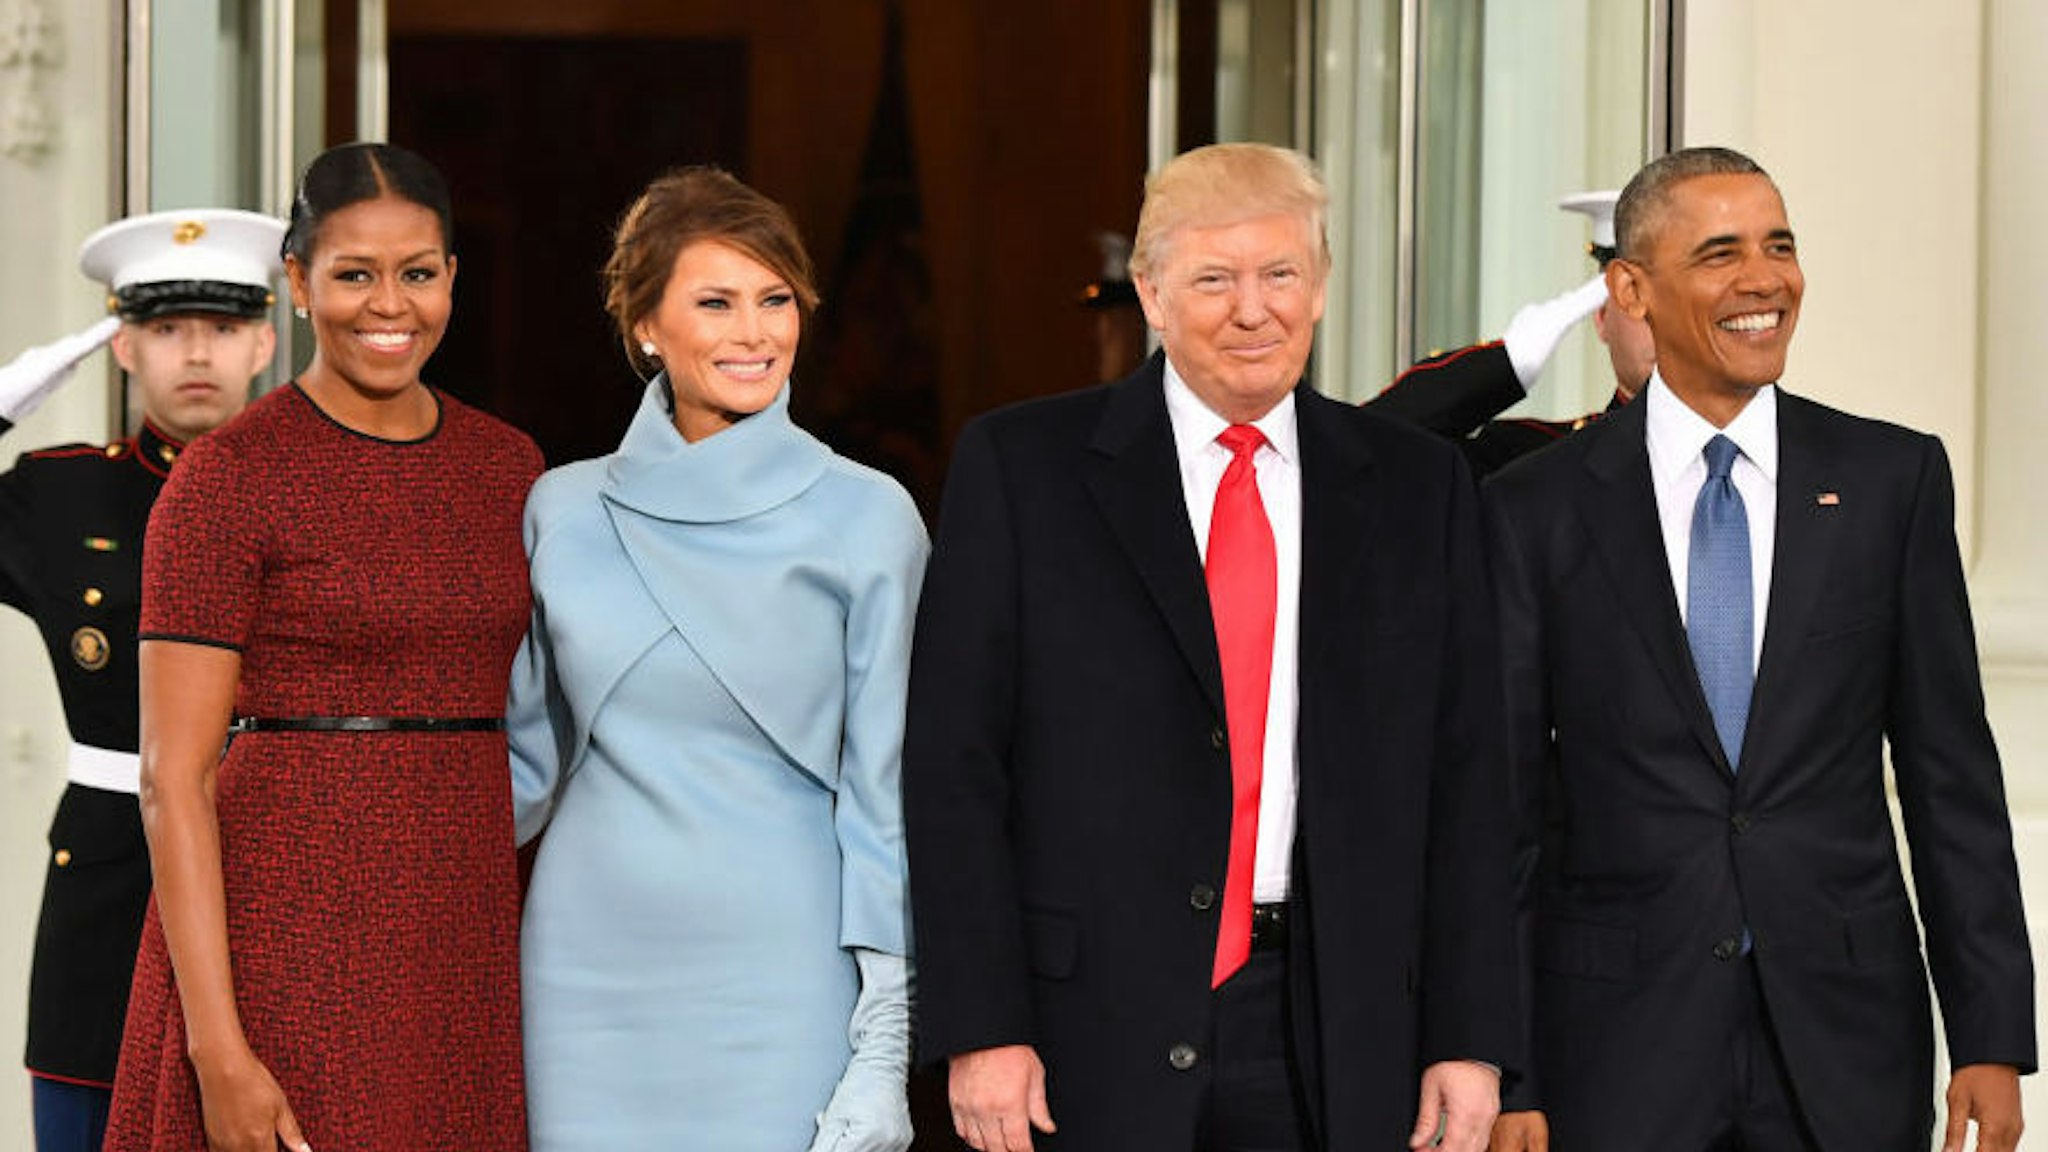 FILE: U.S. President Barack Obama, from right, U.S. President-elect Donald Trump, U.S. First Lady-elect Melania Trump, and U.S. First Lady Michelle Obama stand for a photograph outside of the White House ahead of the 58th presidential inauguration in Washington, D.C., U.S., on Friday, Jan. 20, 2017. Sunday, January 20, 2019, marks the second anniversary of U.S. President Donald Trump's inauguration. Our editors select the best archive images looking back over Trump’s second year in office.